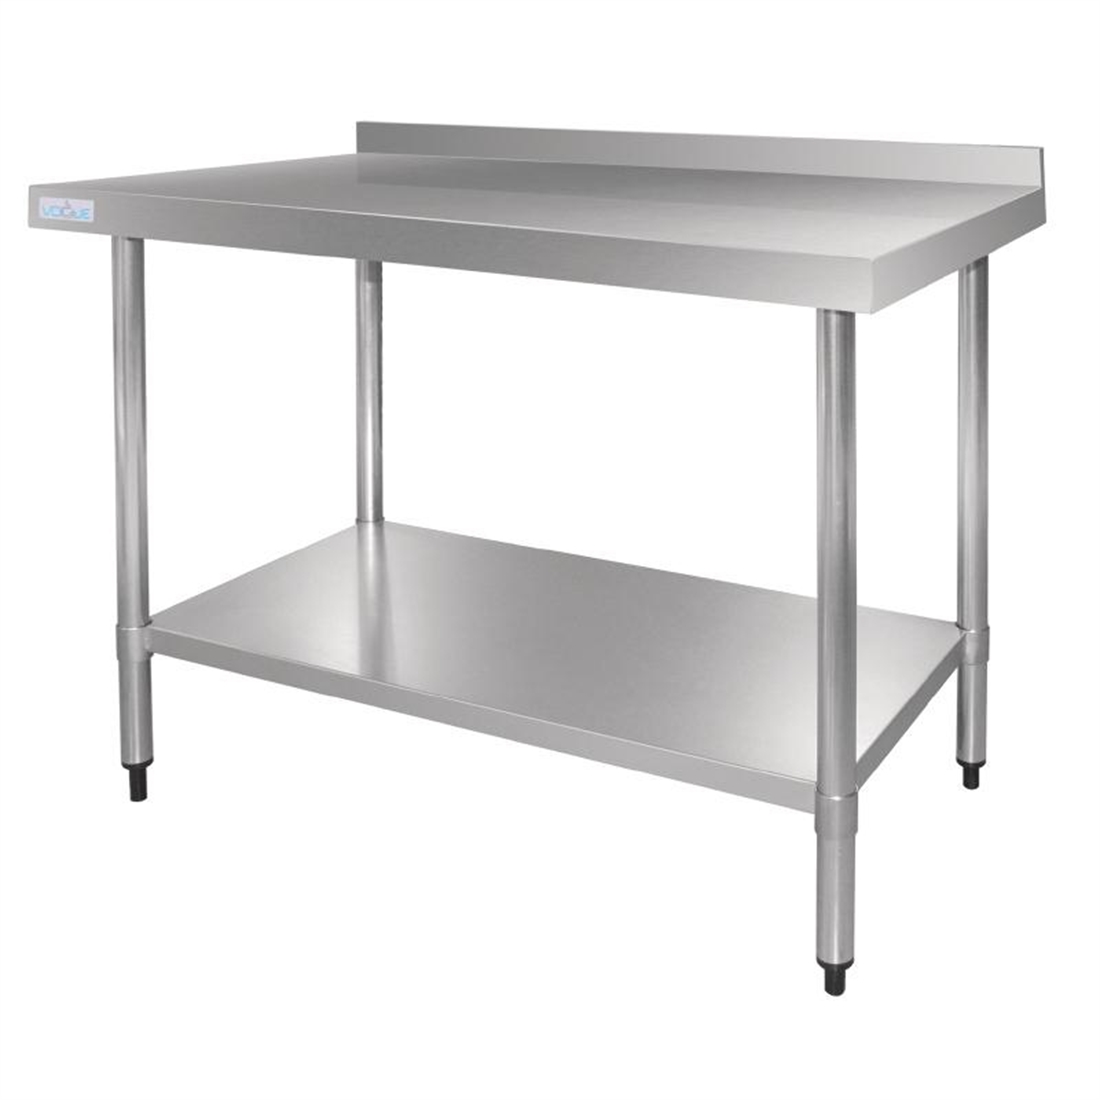 Vogue Stainless Steel Table with Upstand 1800mm